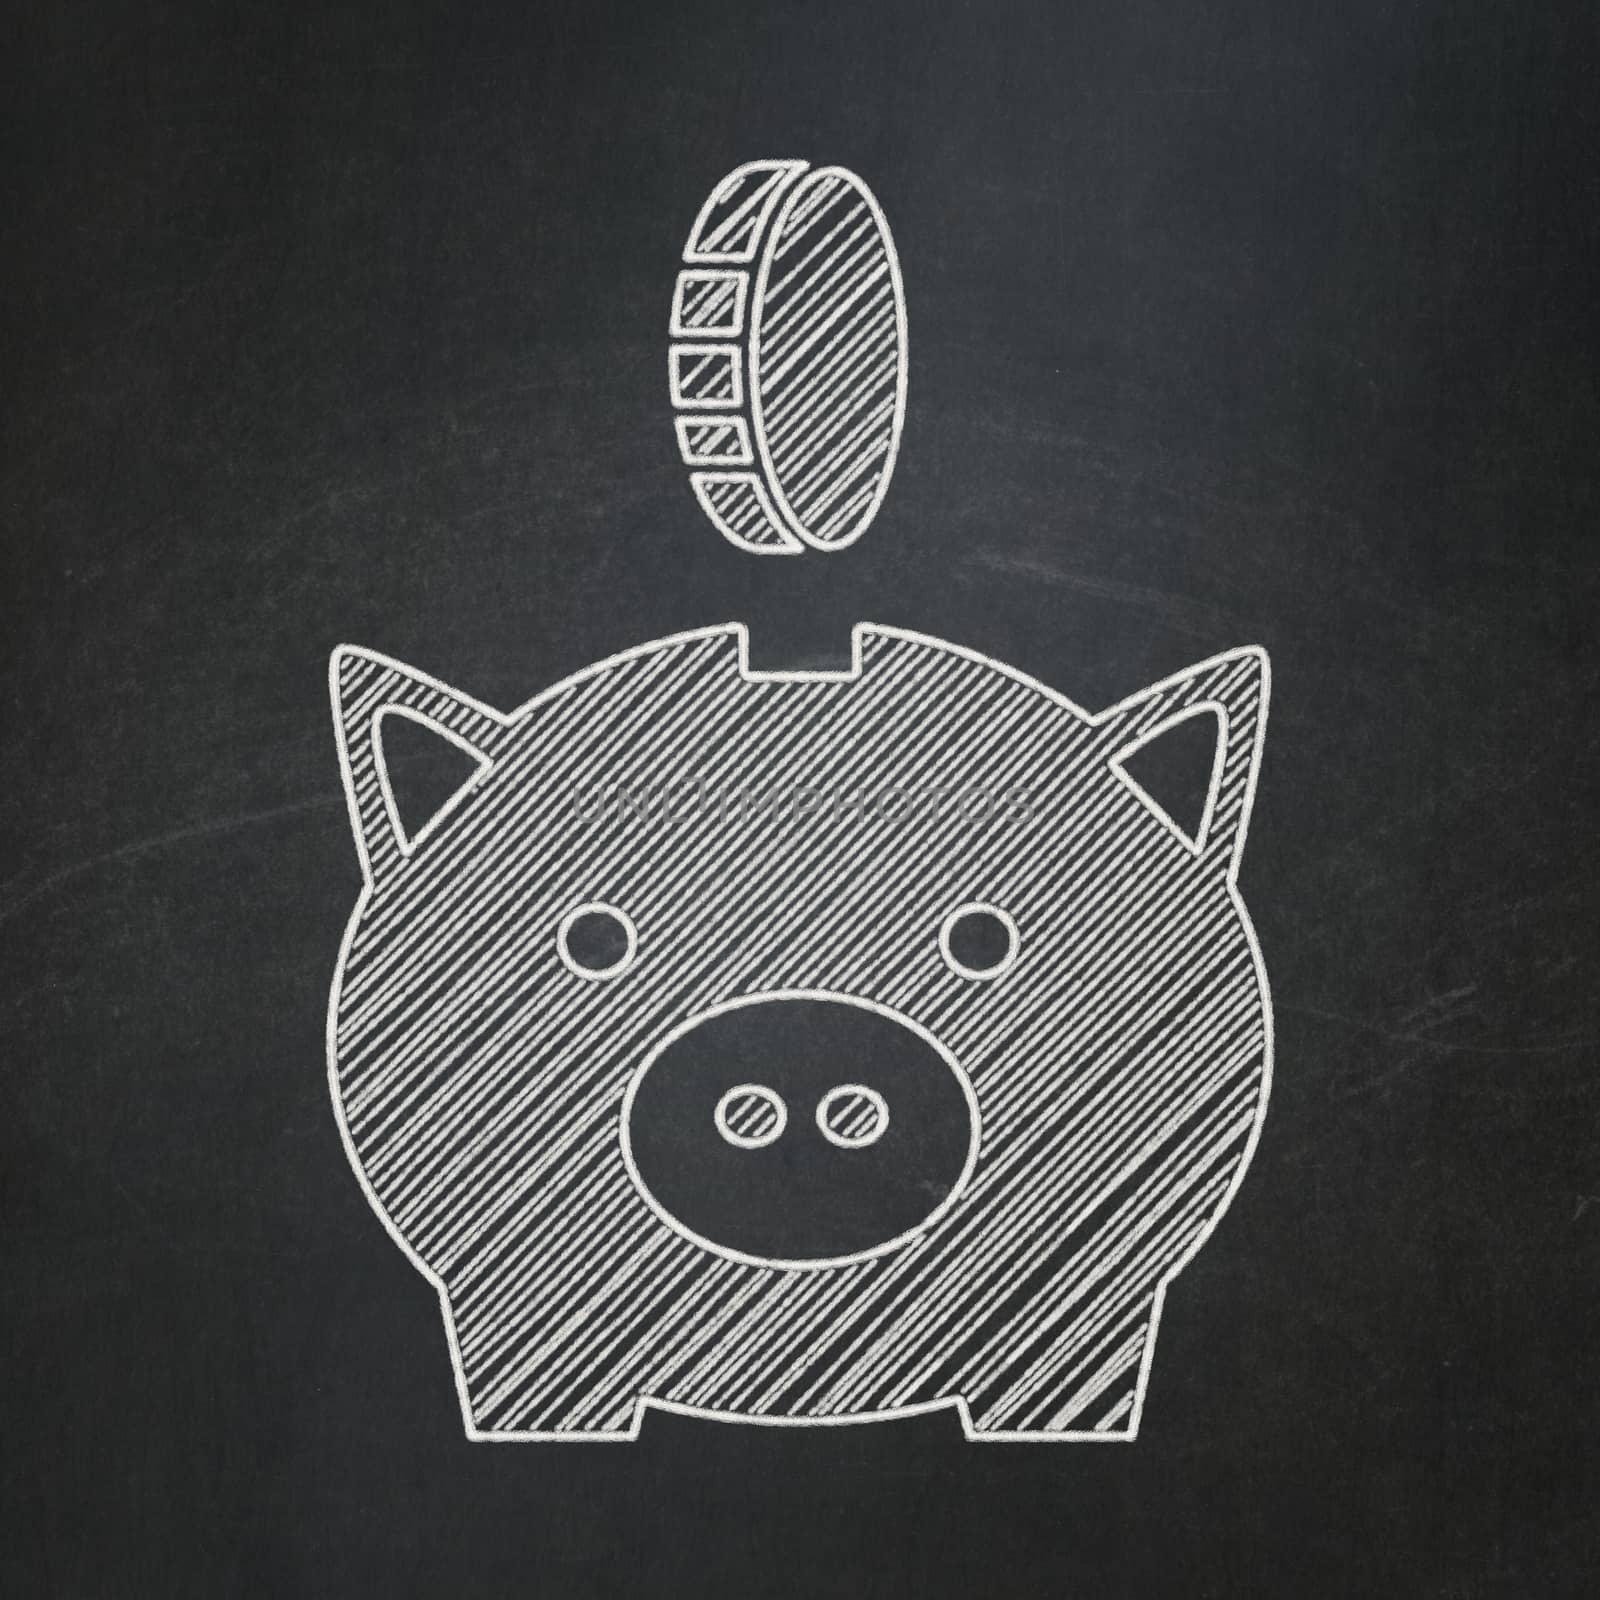 Banking concept: Money Box With Coin icon on Black chalkboard background